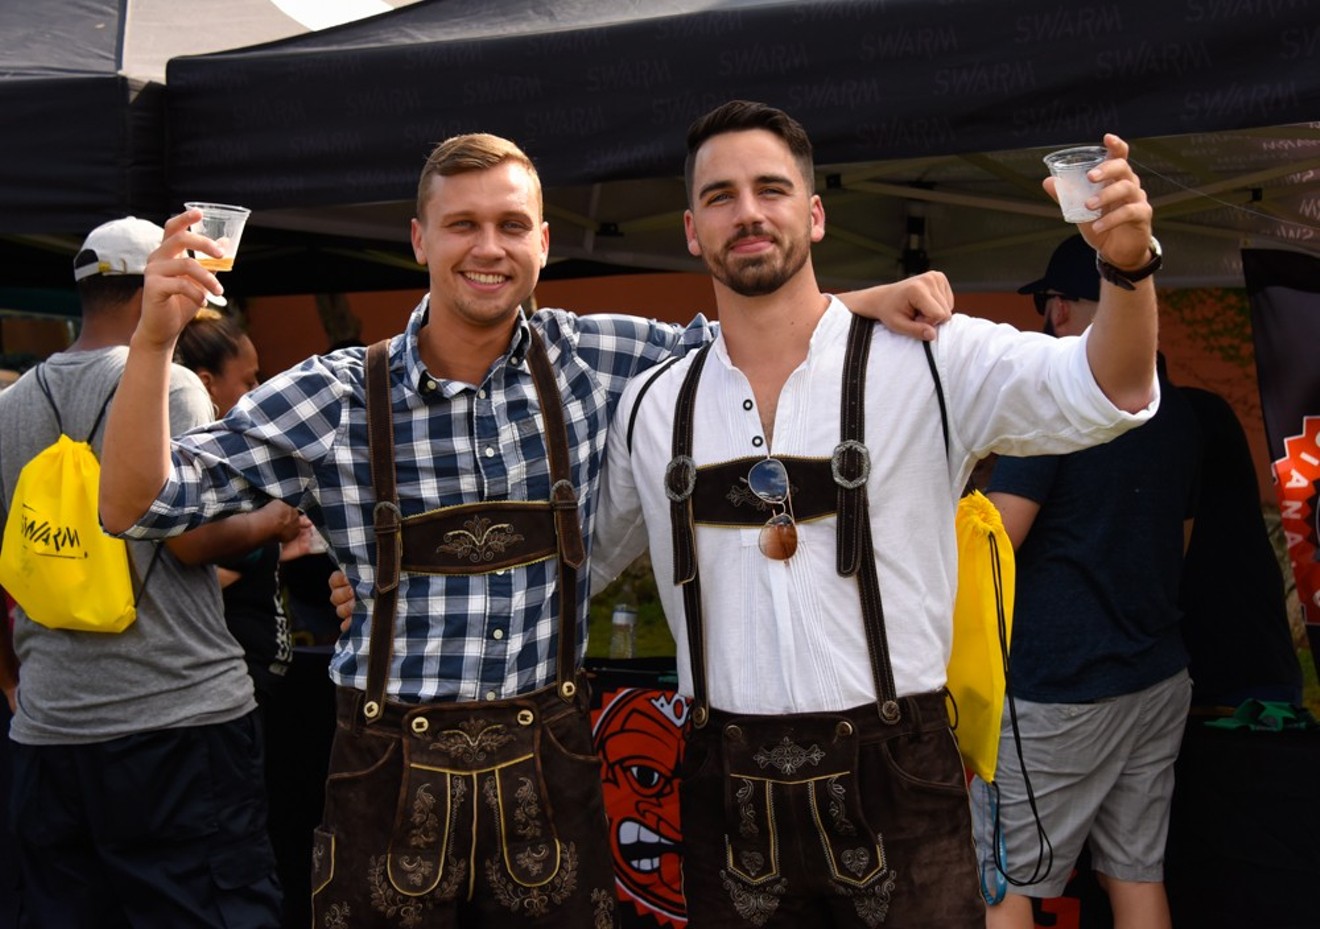 See more Grovetoberfest 2018 pictures here.